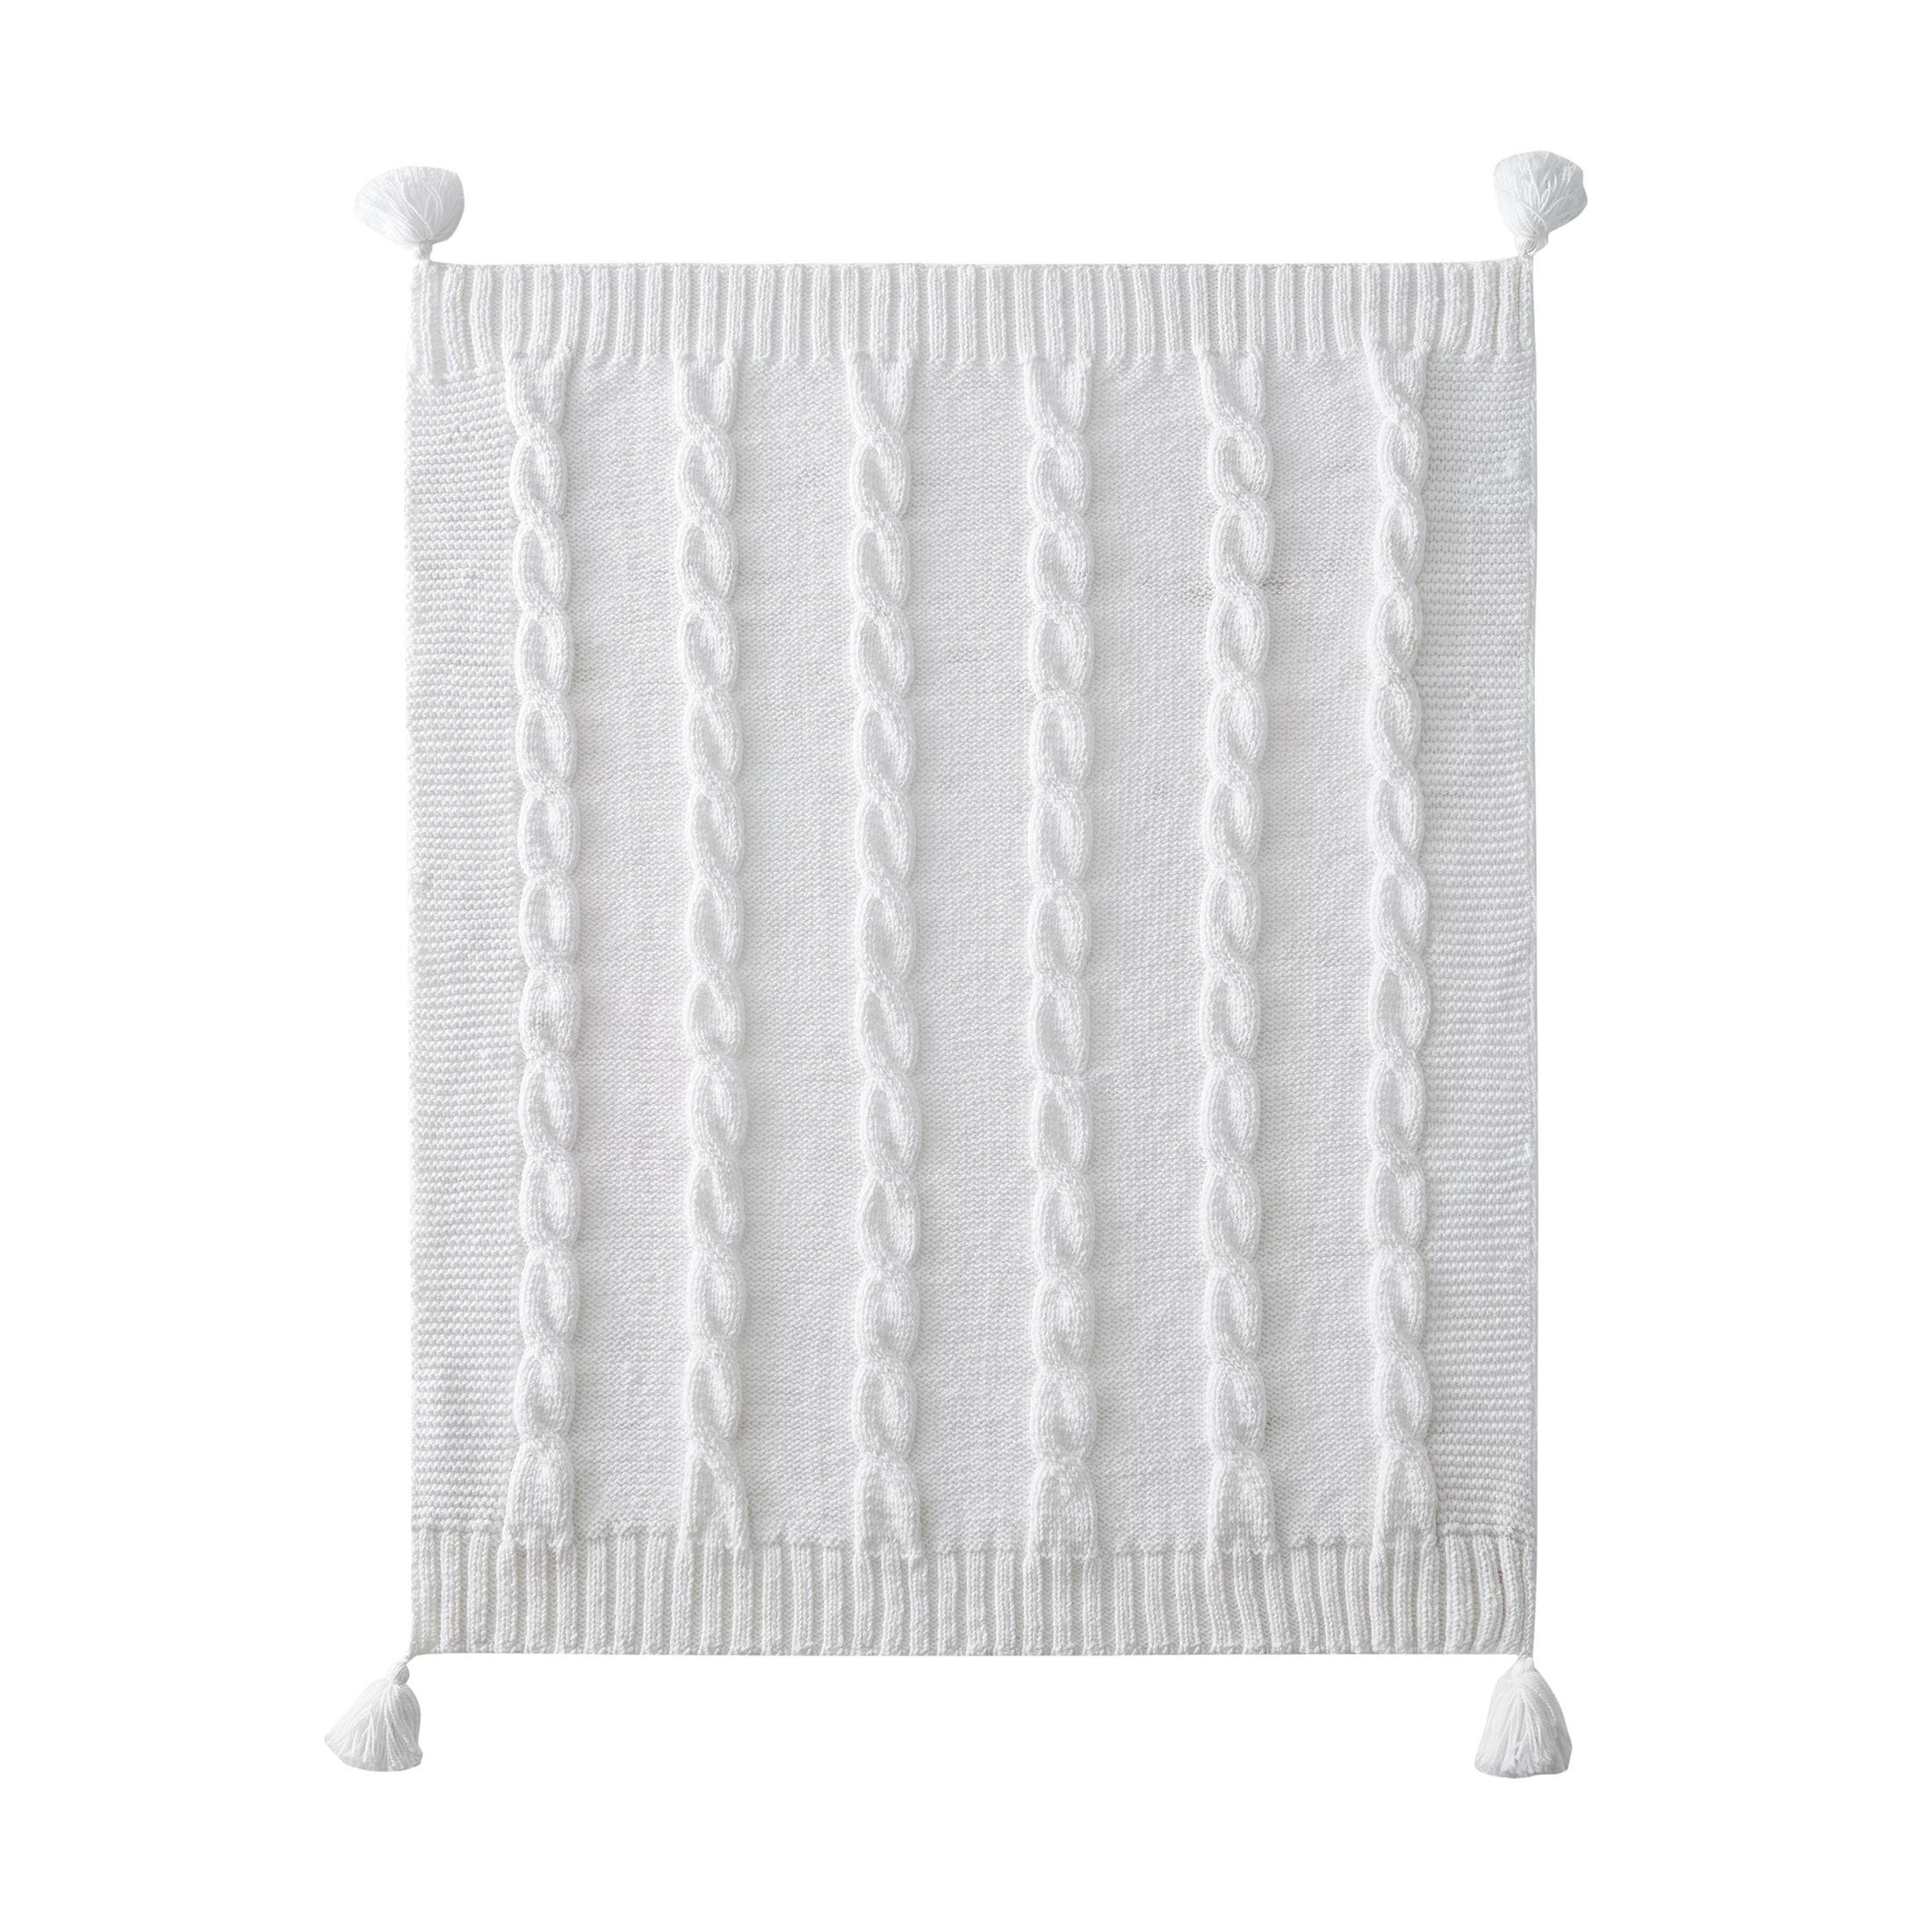 My Texas House Willow Cable Knit Solid Polyester Throw, Easy Wash, 50 x 60, White | Walmart (US)